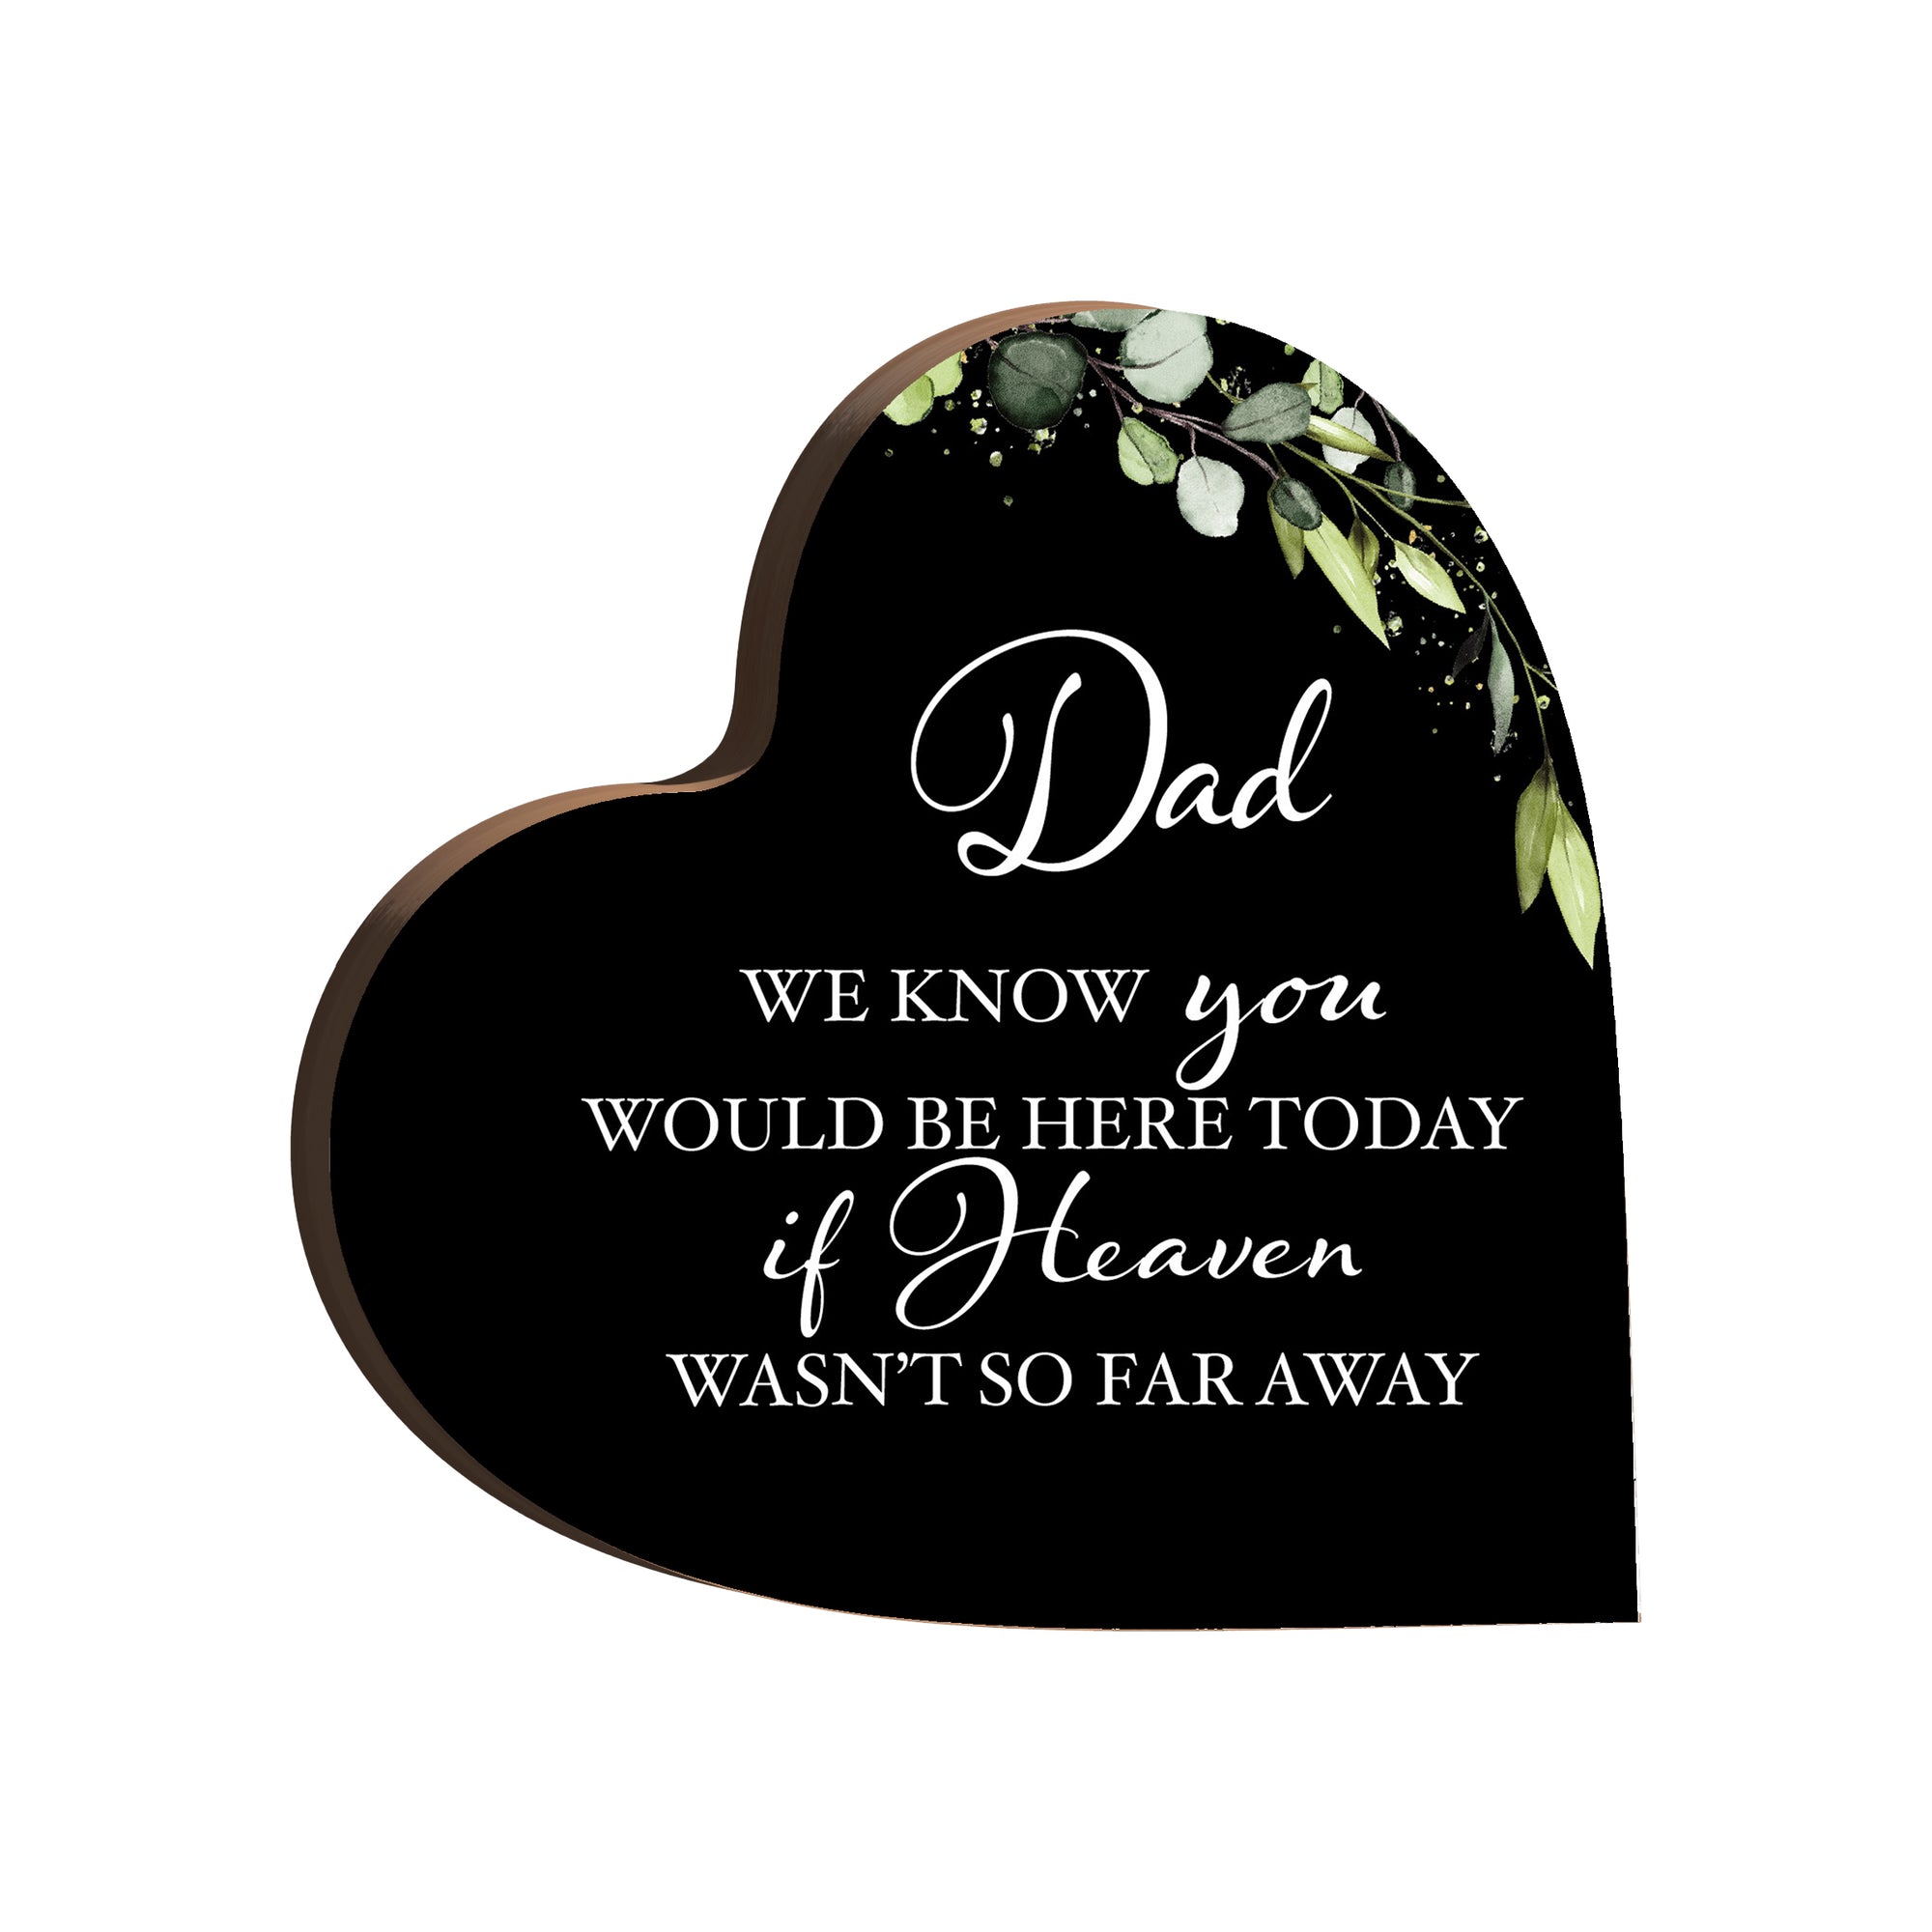 Elegant memorial decorations - Wooden heart block sign to commemorate loved ones.